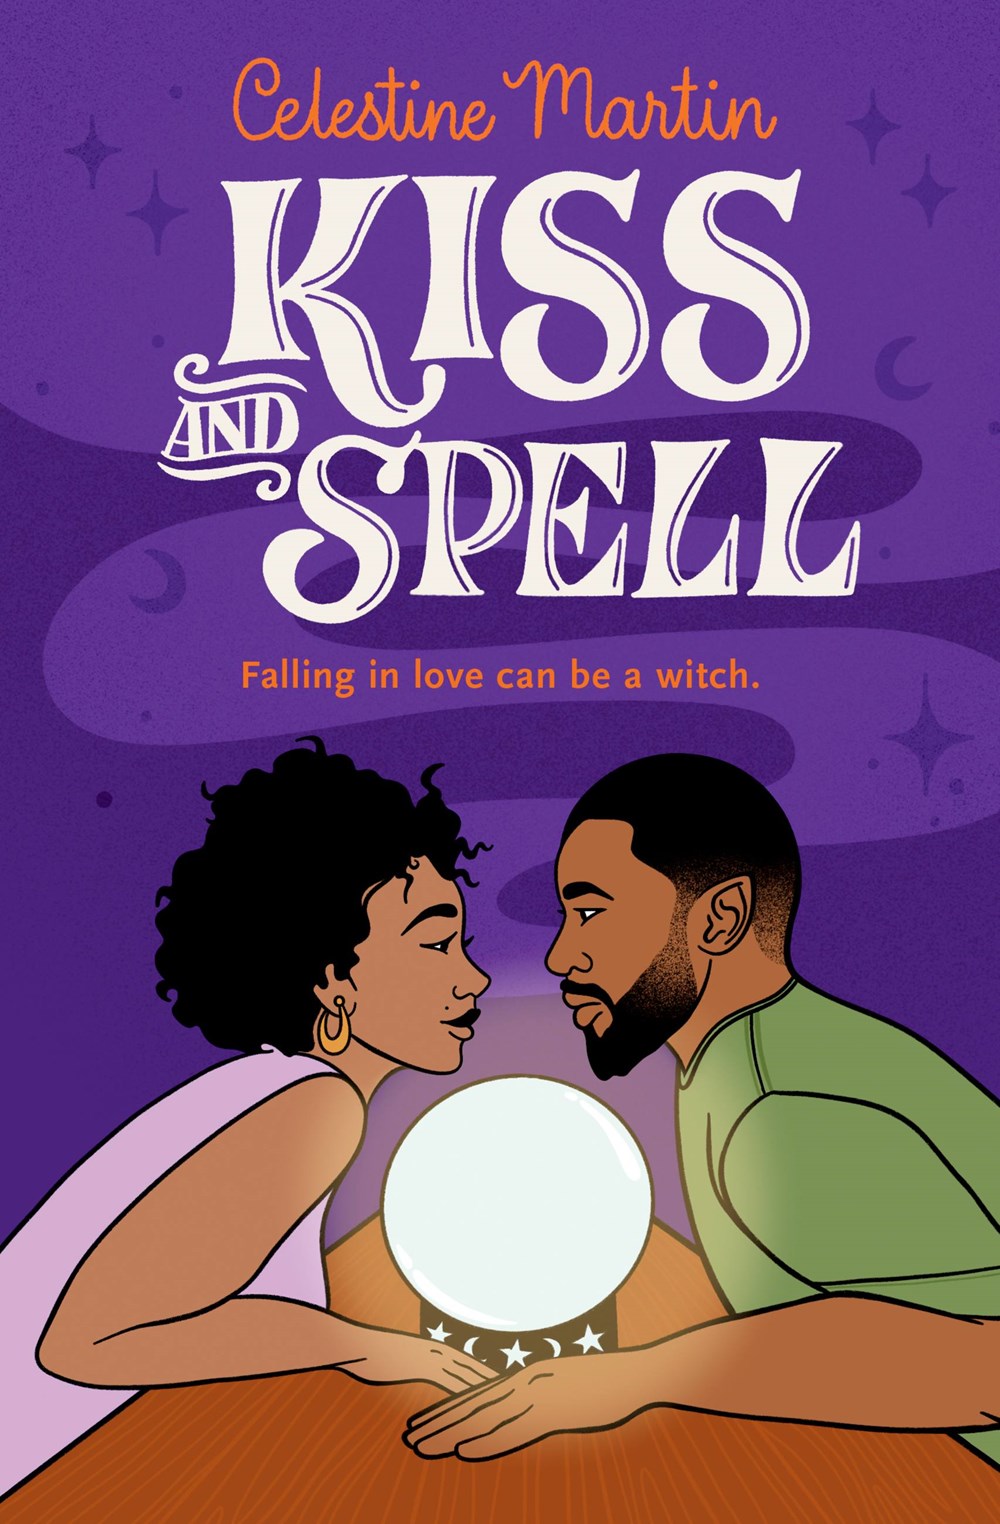 Kiss and Spell by Celestine Martin (Paperback)